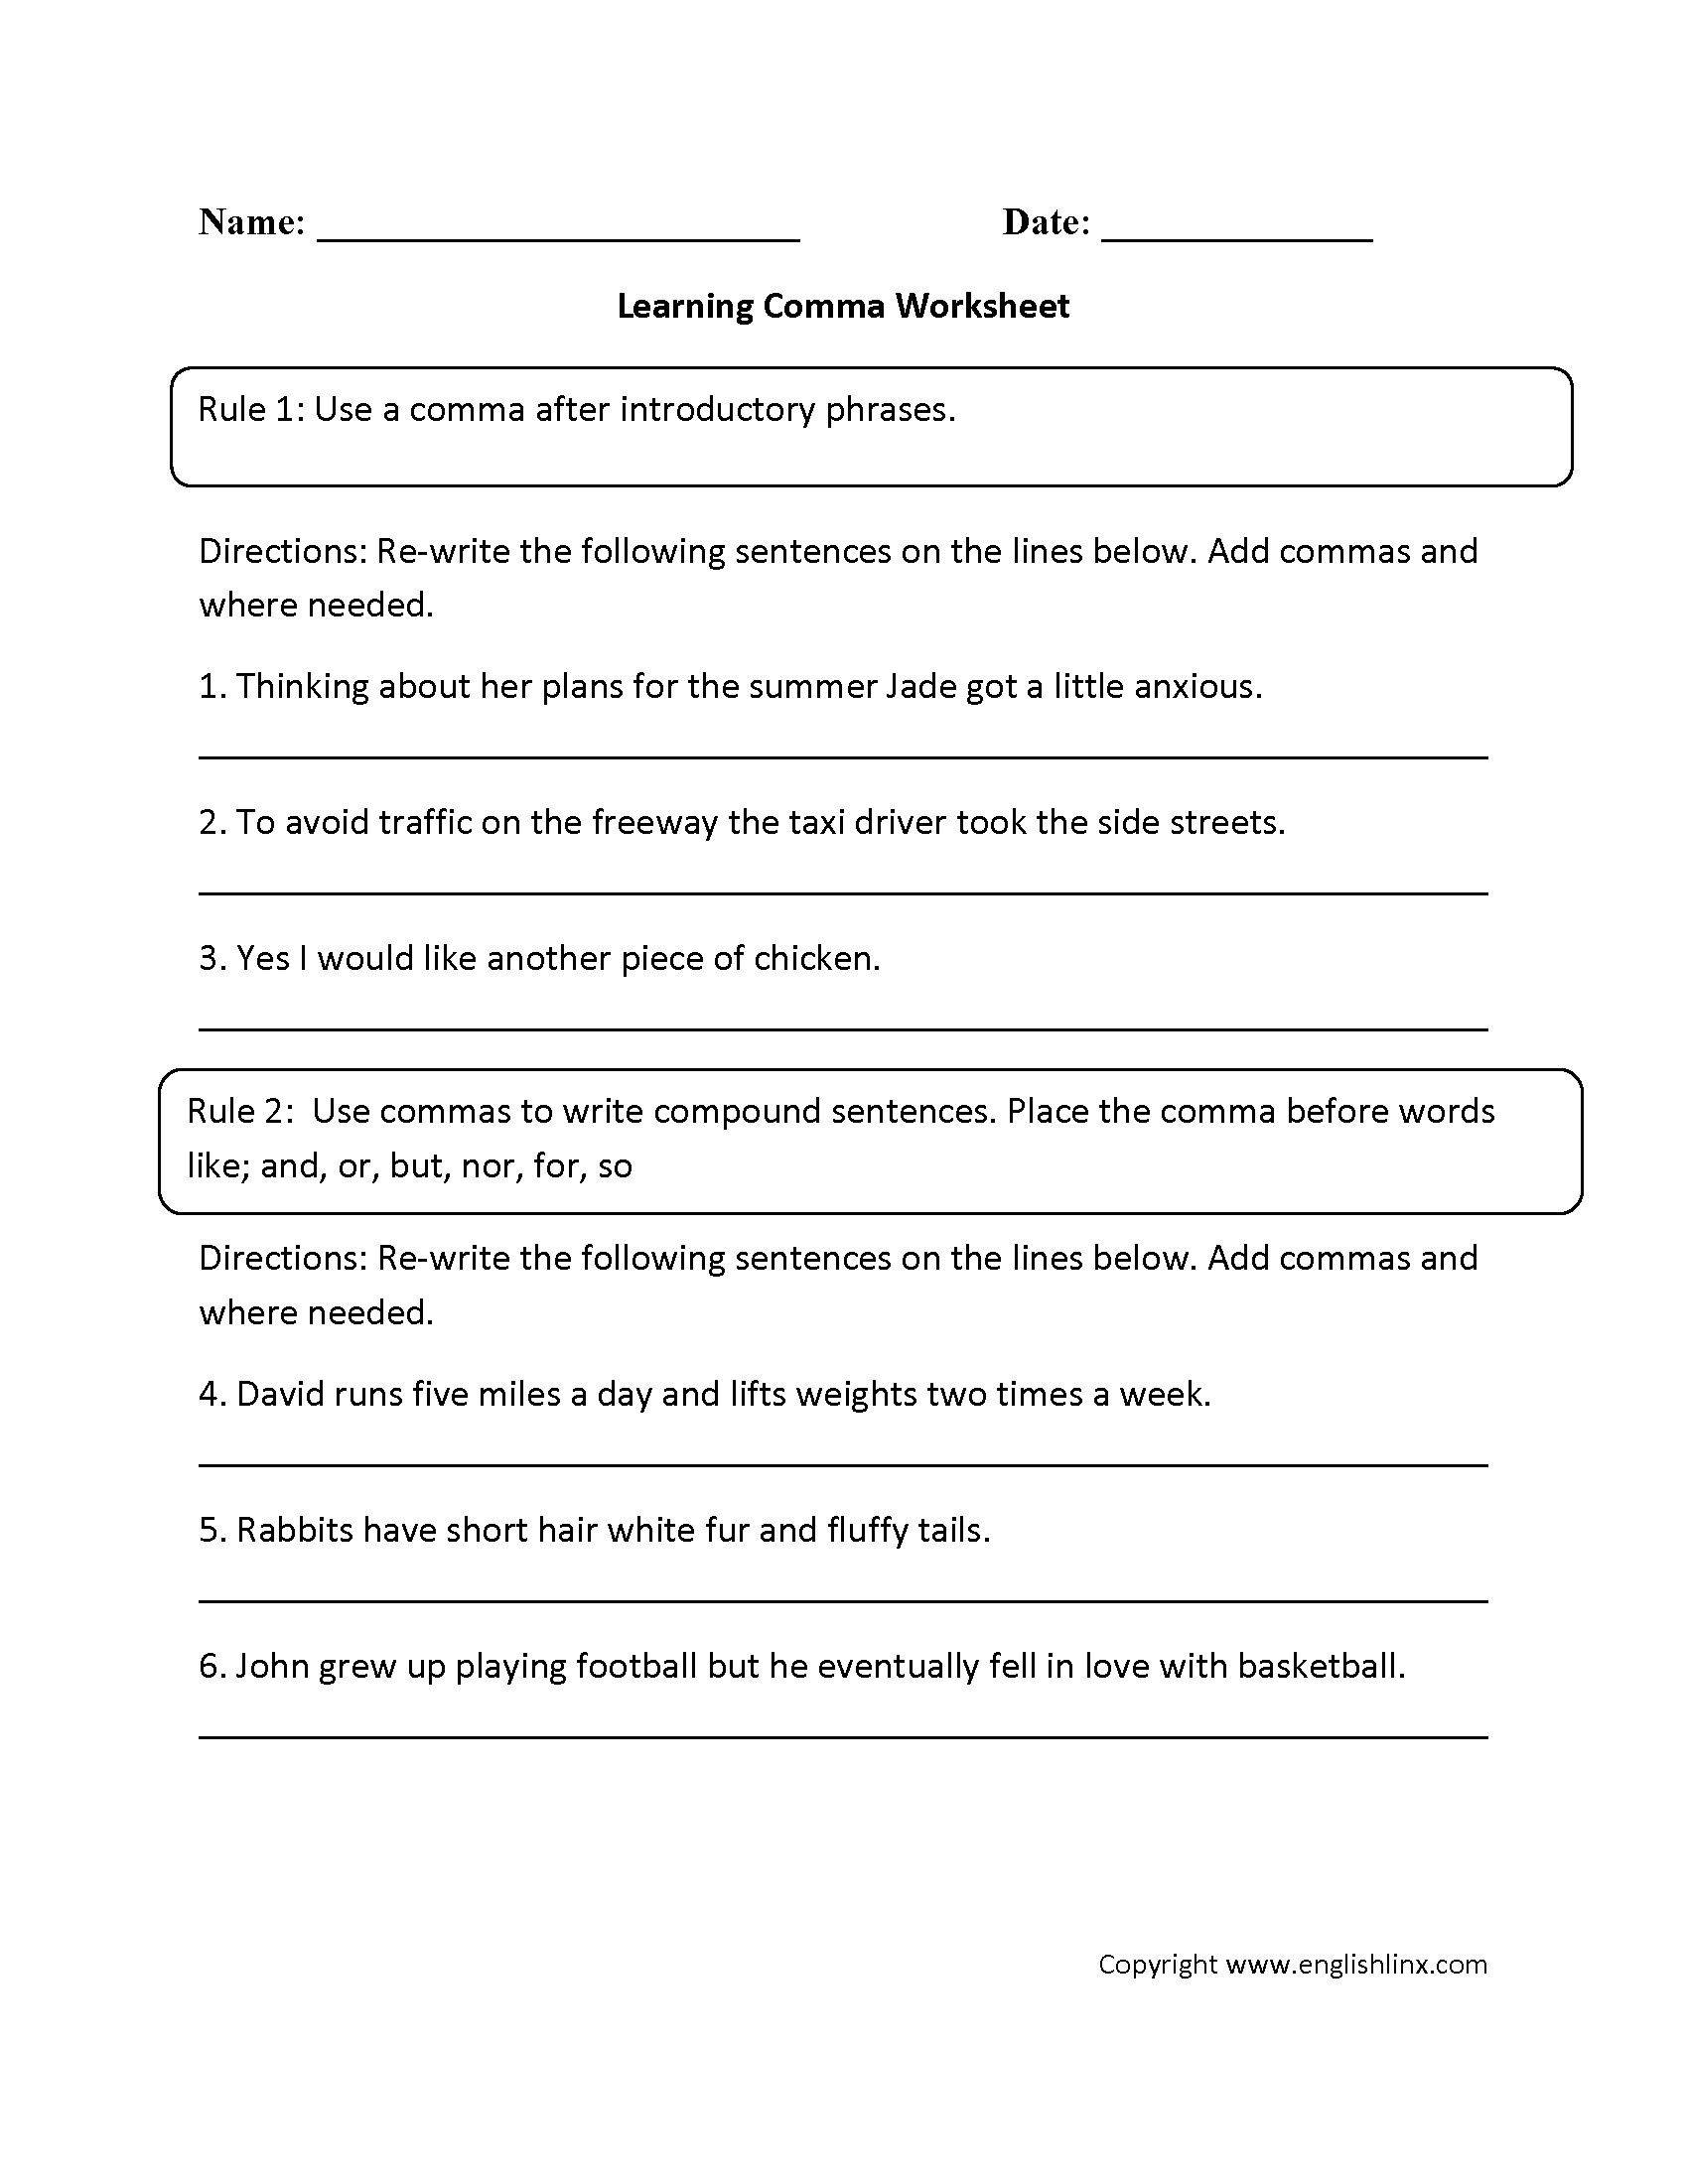 Com Mas with Introductory Words Worksheets Image